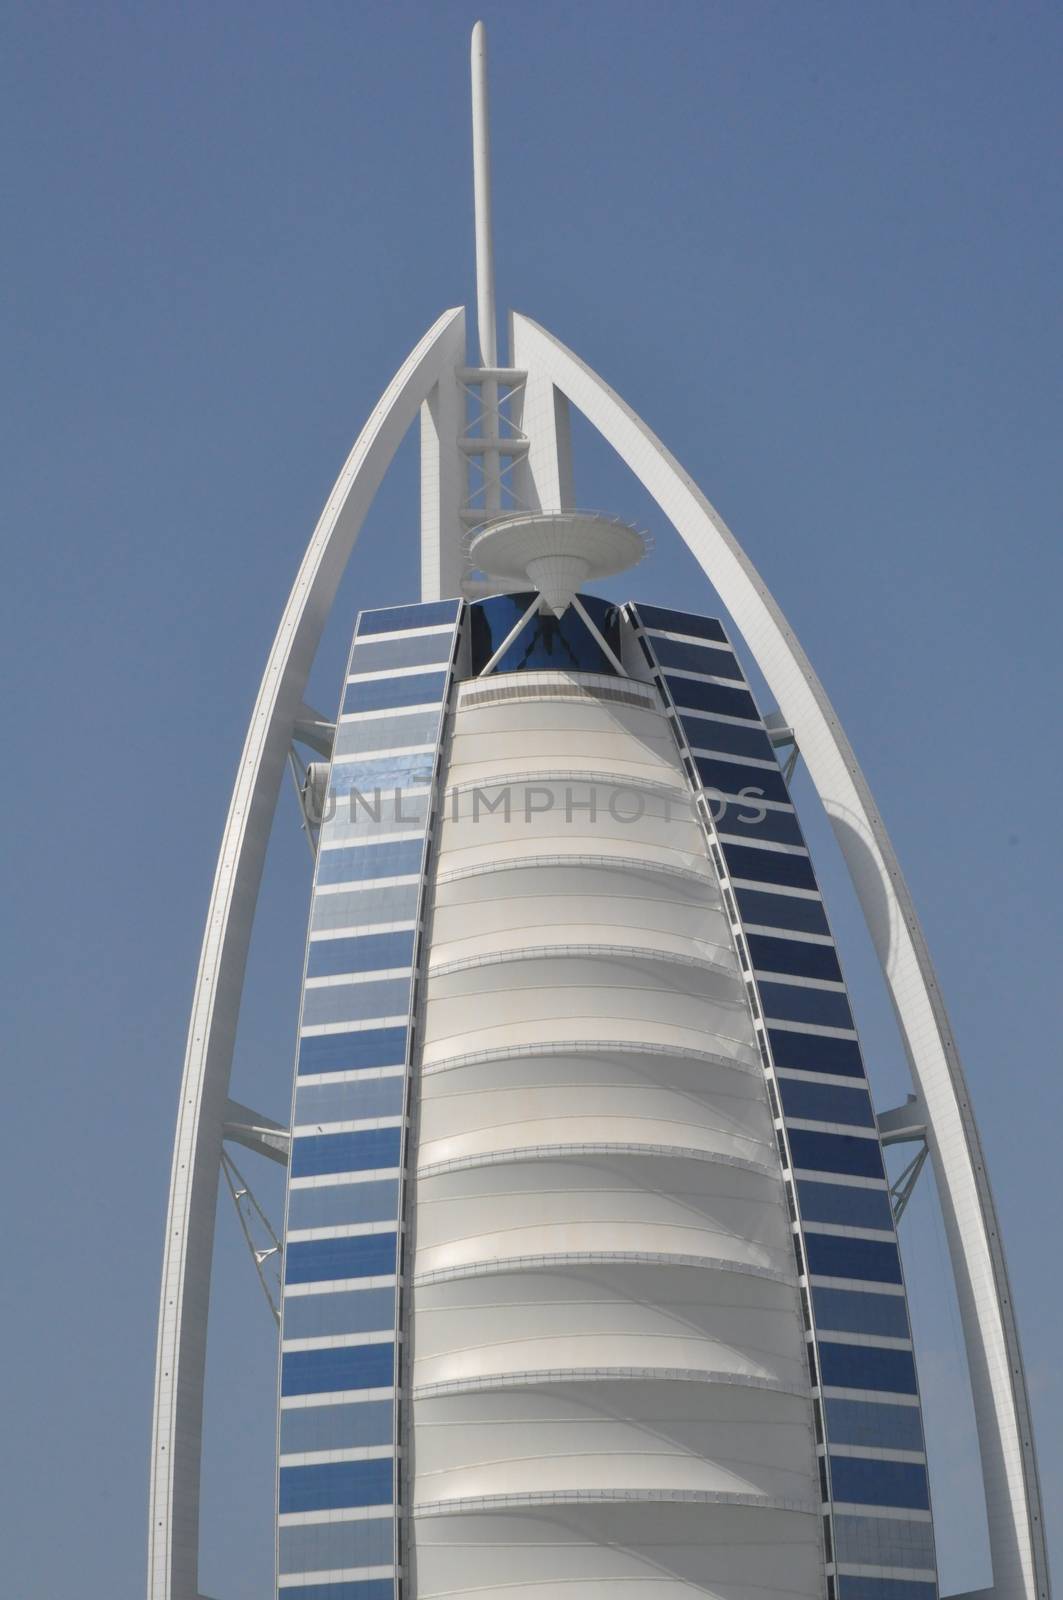 Burj Al Arab in Dubai, UAE. It is built on an artificial island, is considered a 7-star hotel and is the fourth tallest hotel in the world.